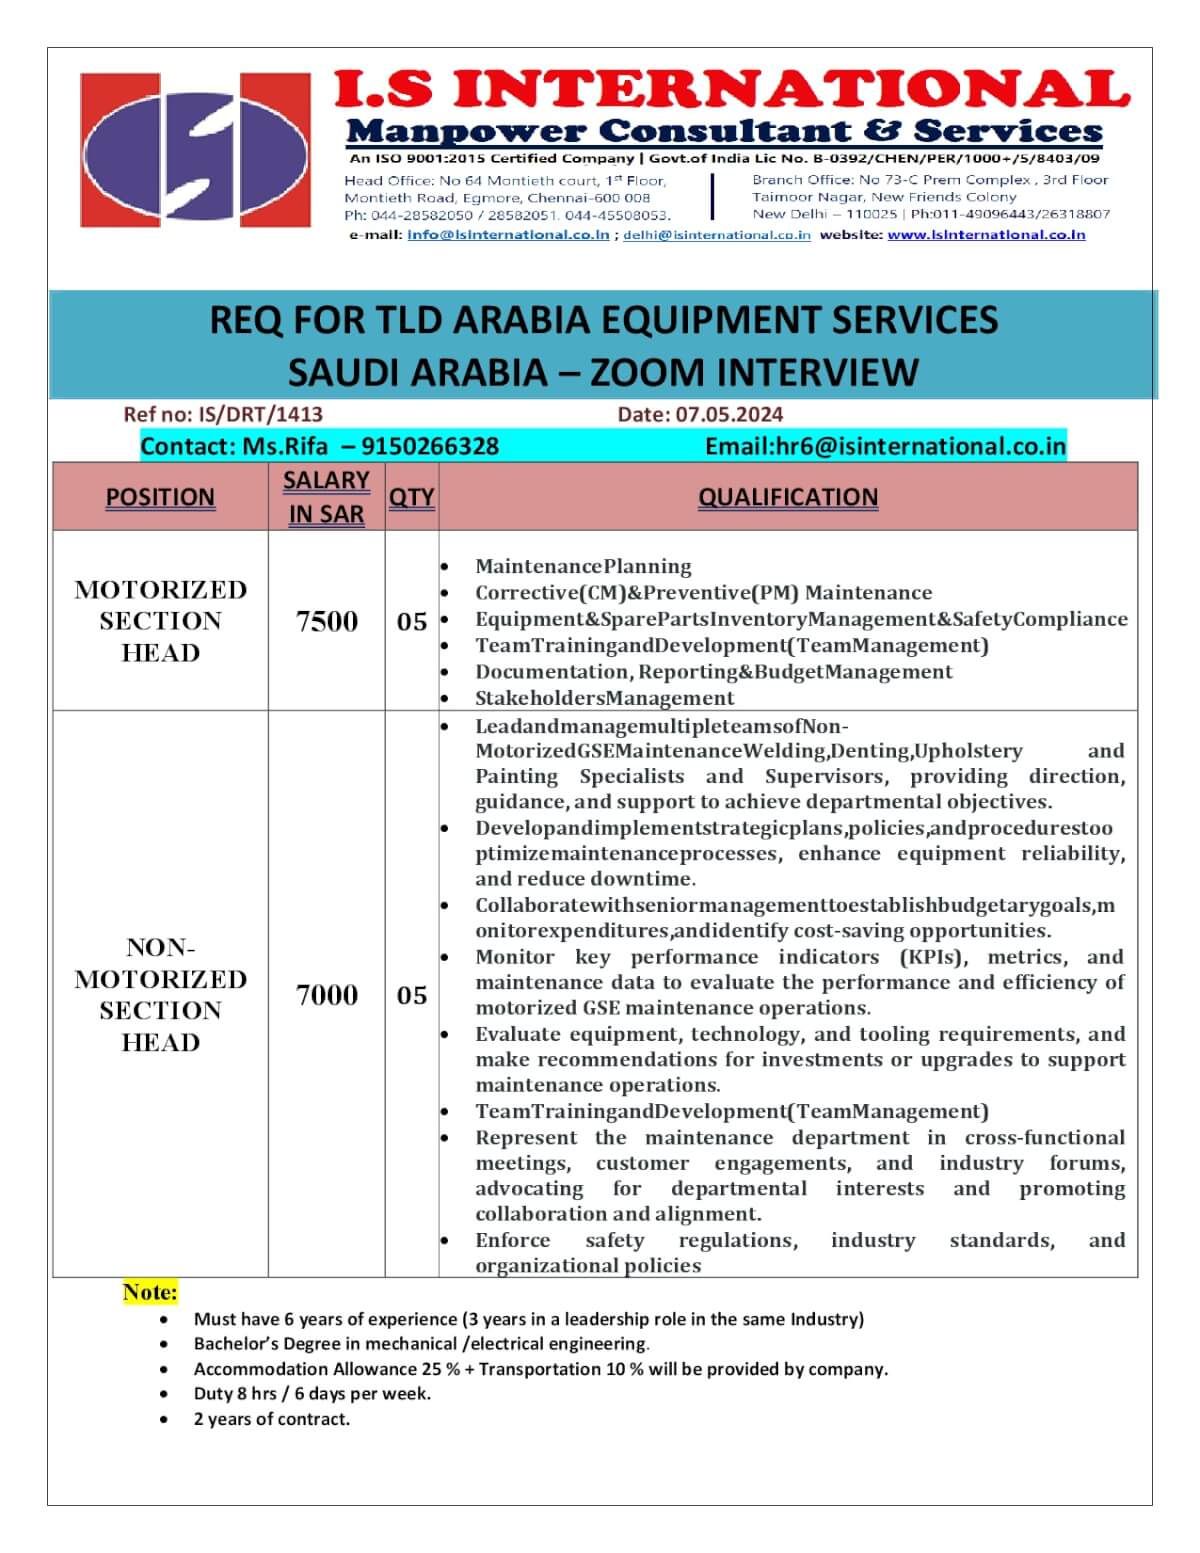 Required for TLD Arabia Equipment services - Saudi Arabia